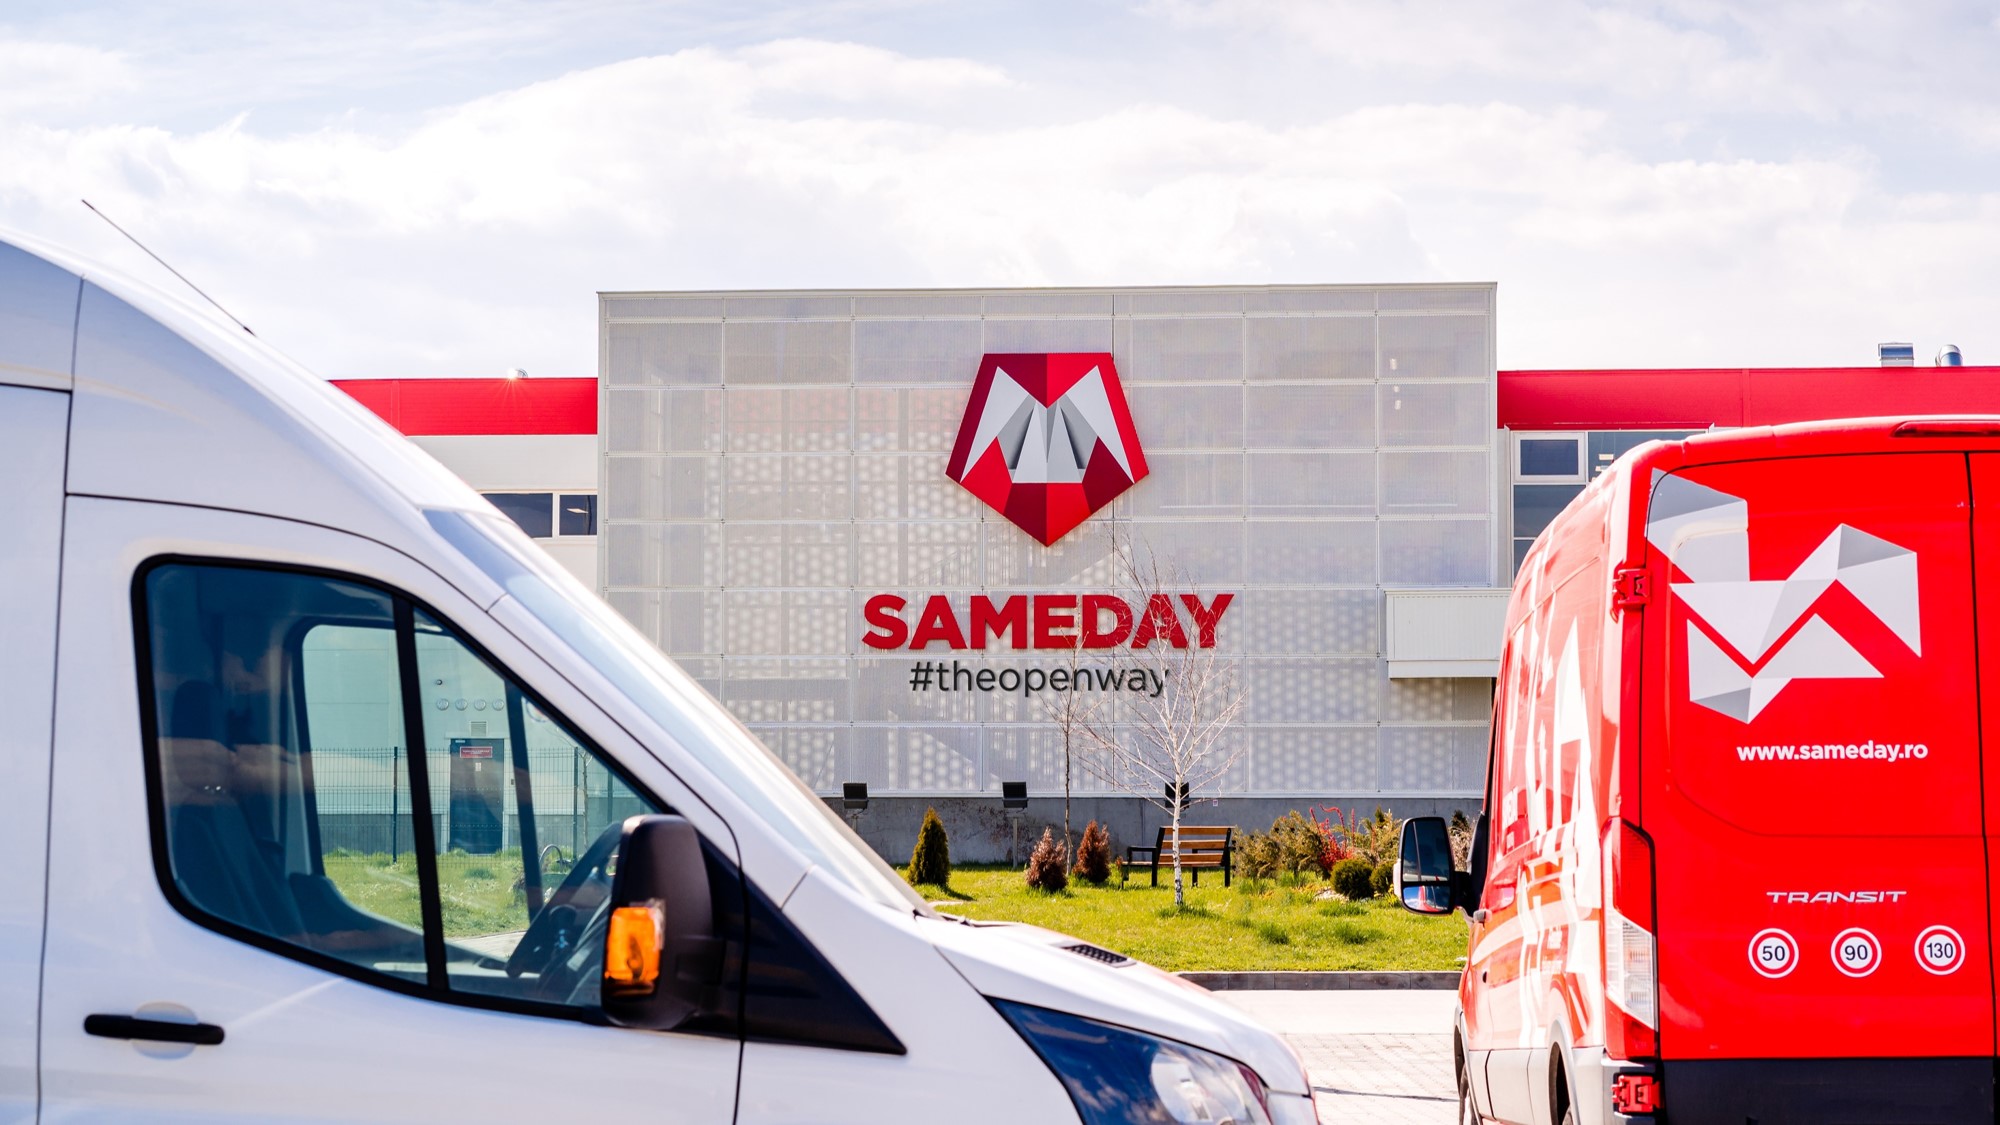 14 years since its founding, Sameday reports an increase in